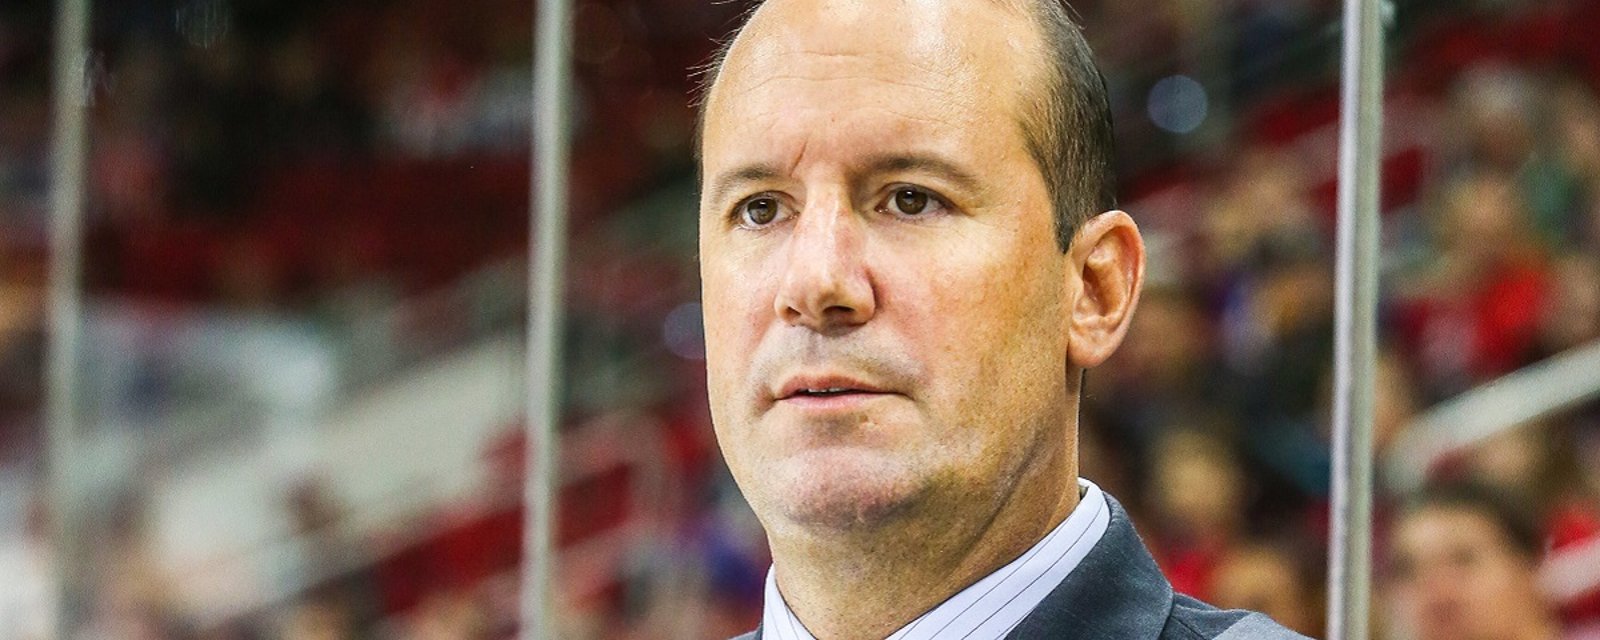 NHL coach says his entire team is sick and every player is a game time decision.